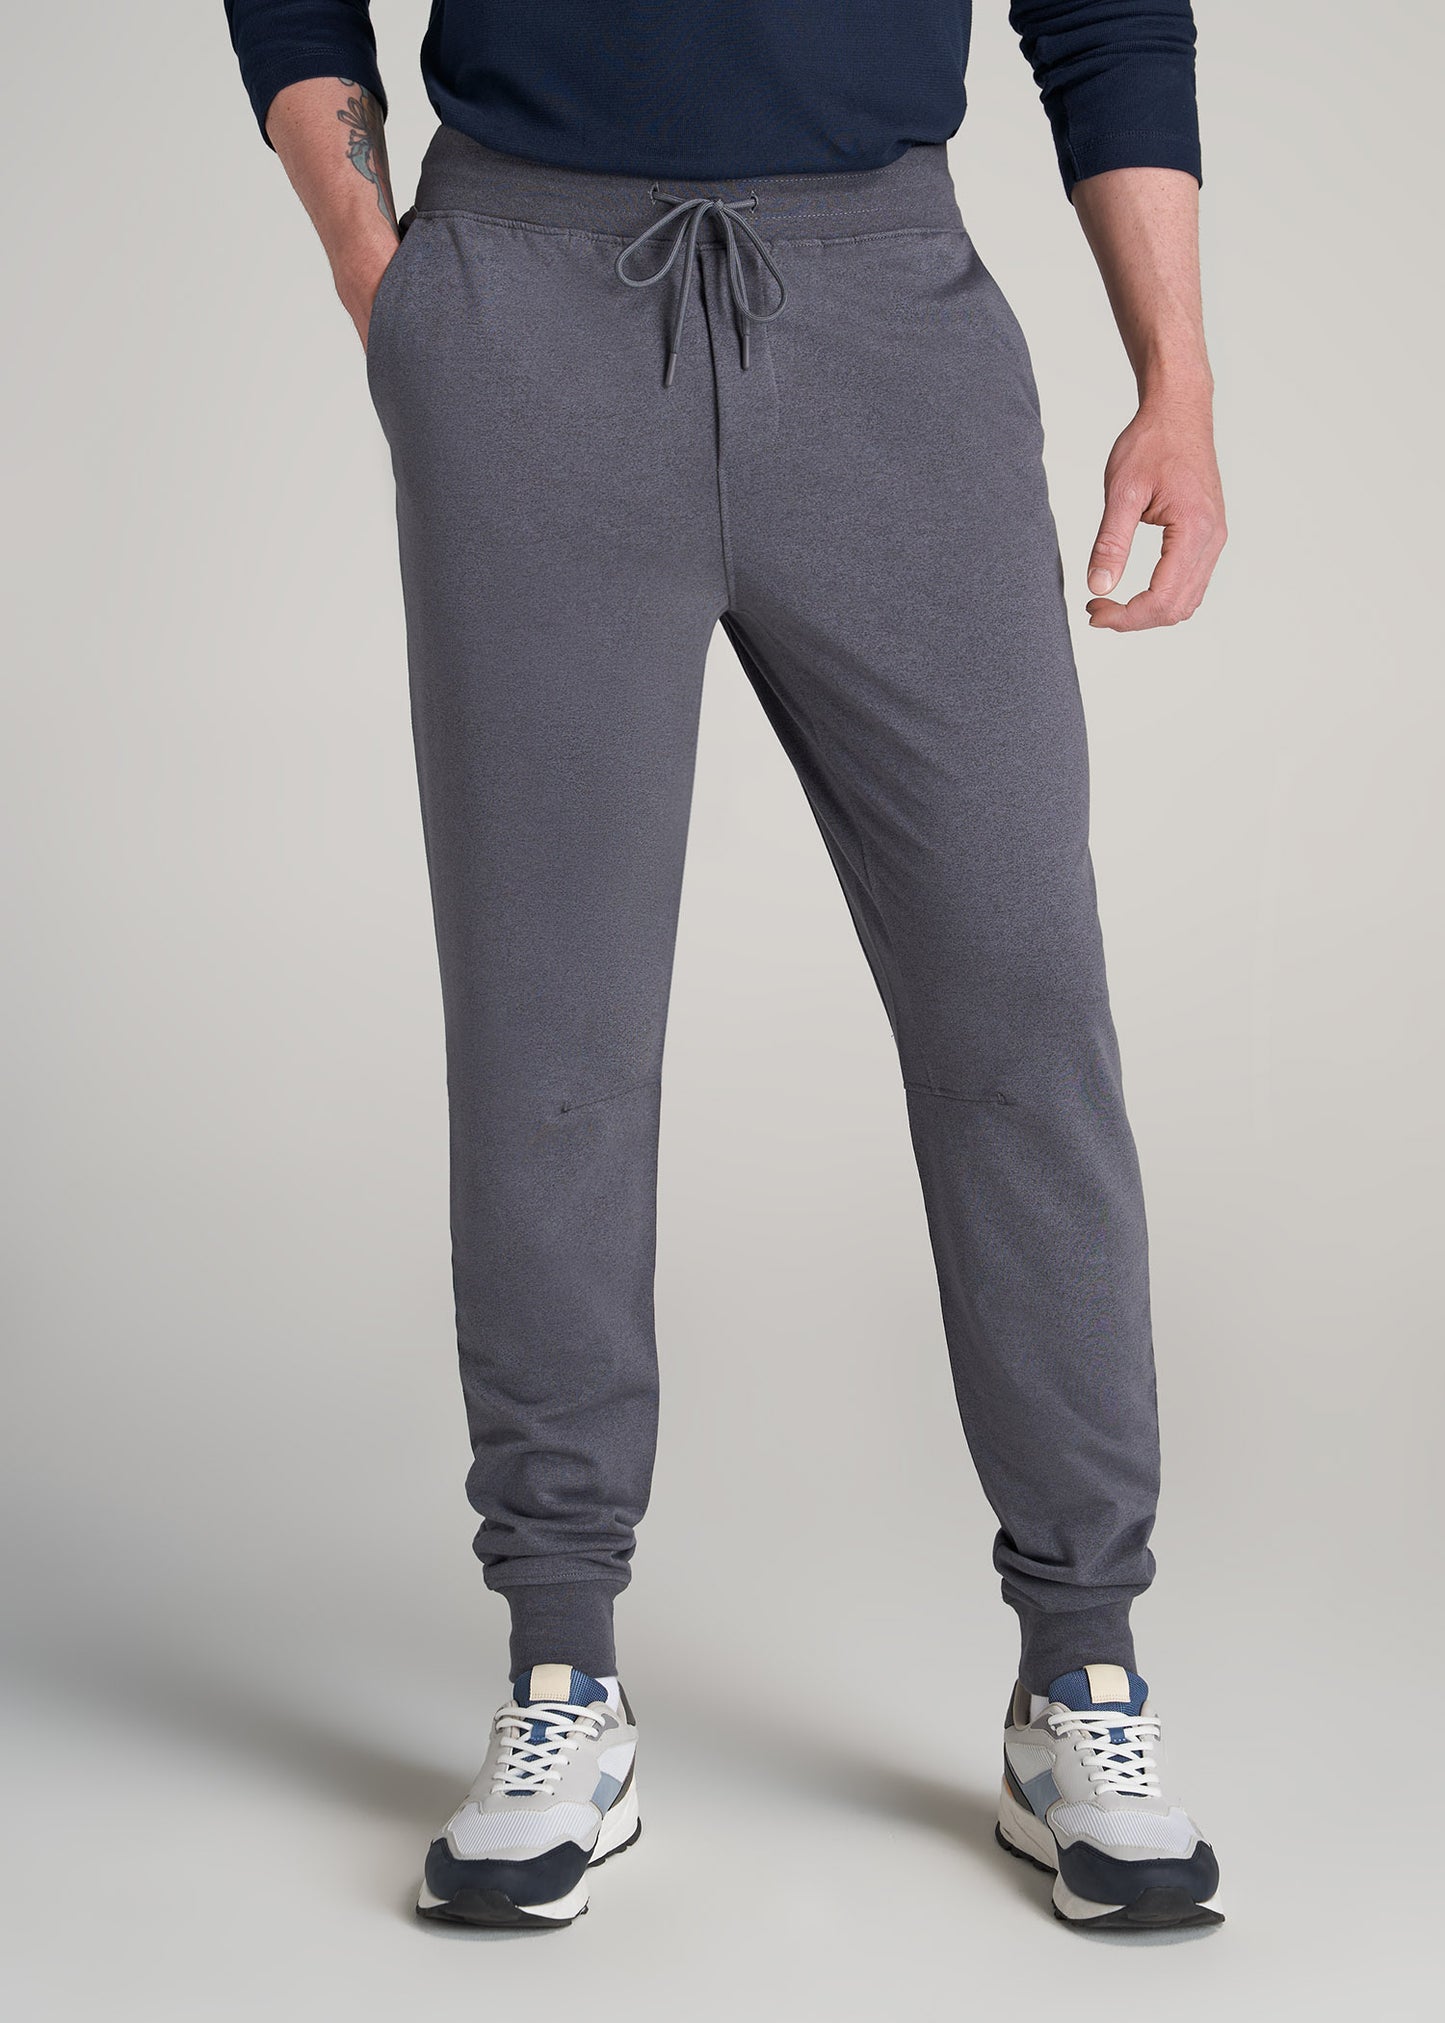 Tech Charcoal Mix Tall A.T. Performance Slim French Terry Joggers ...